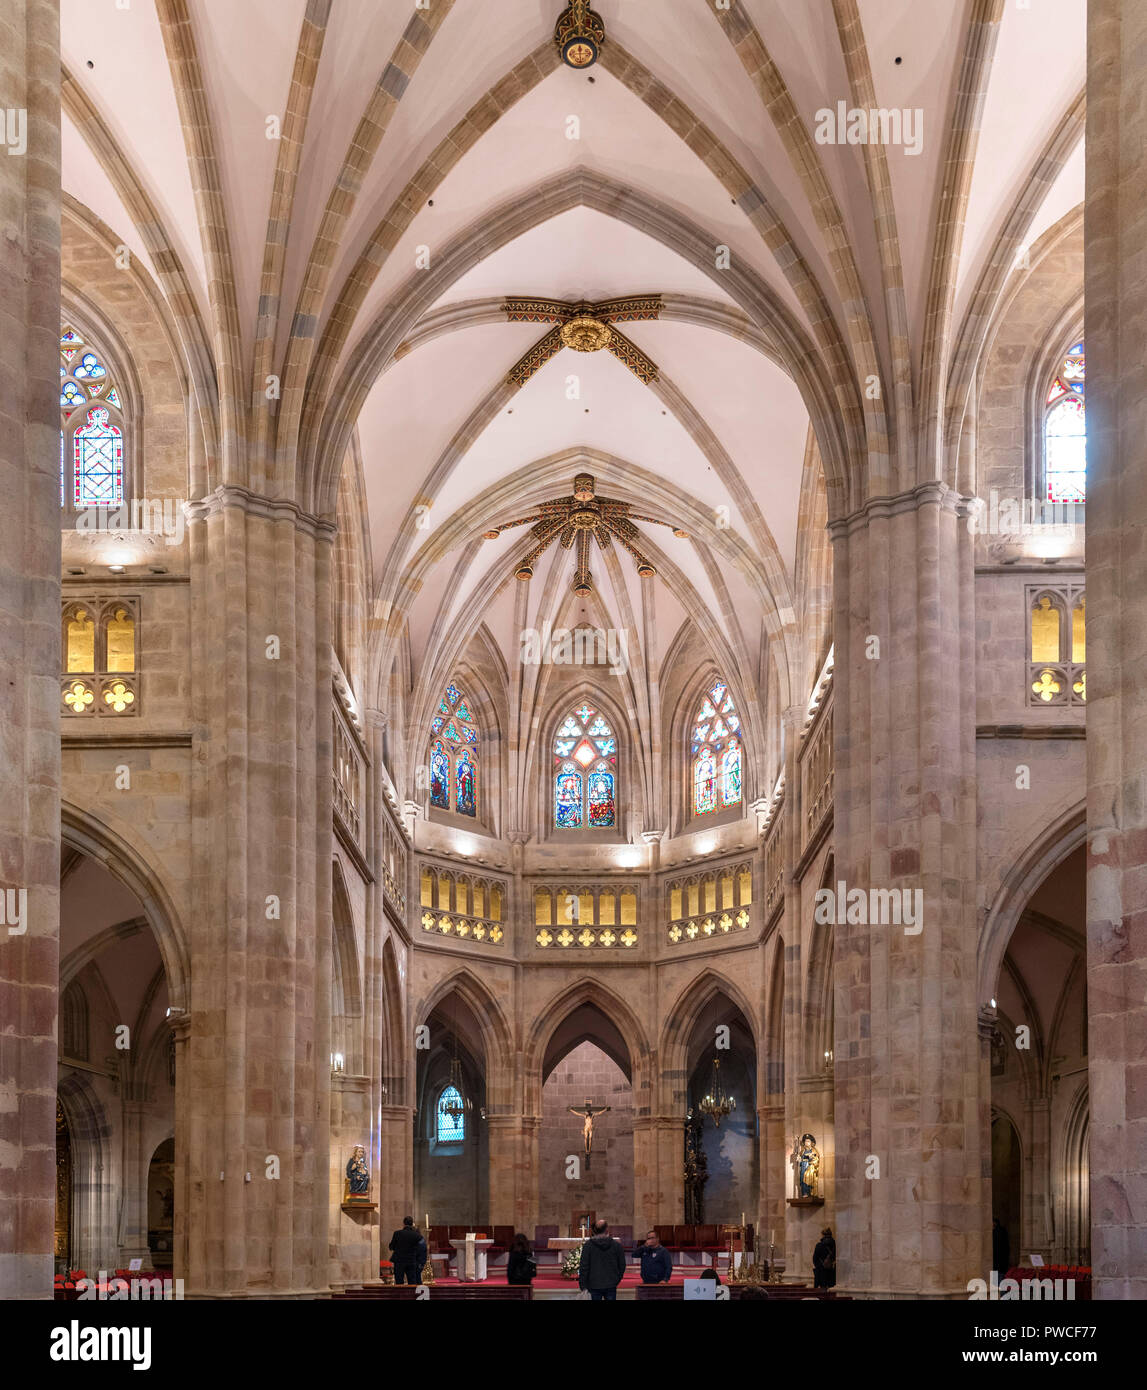 Interior of Bilbao Cathedral, Bilbao, Basque Country, Spain Stock Photo